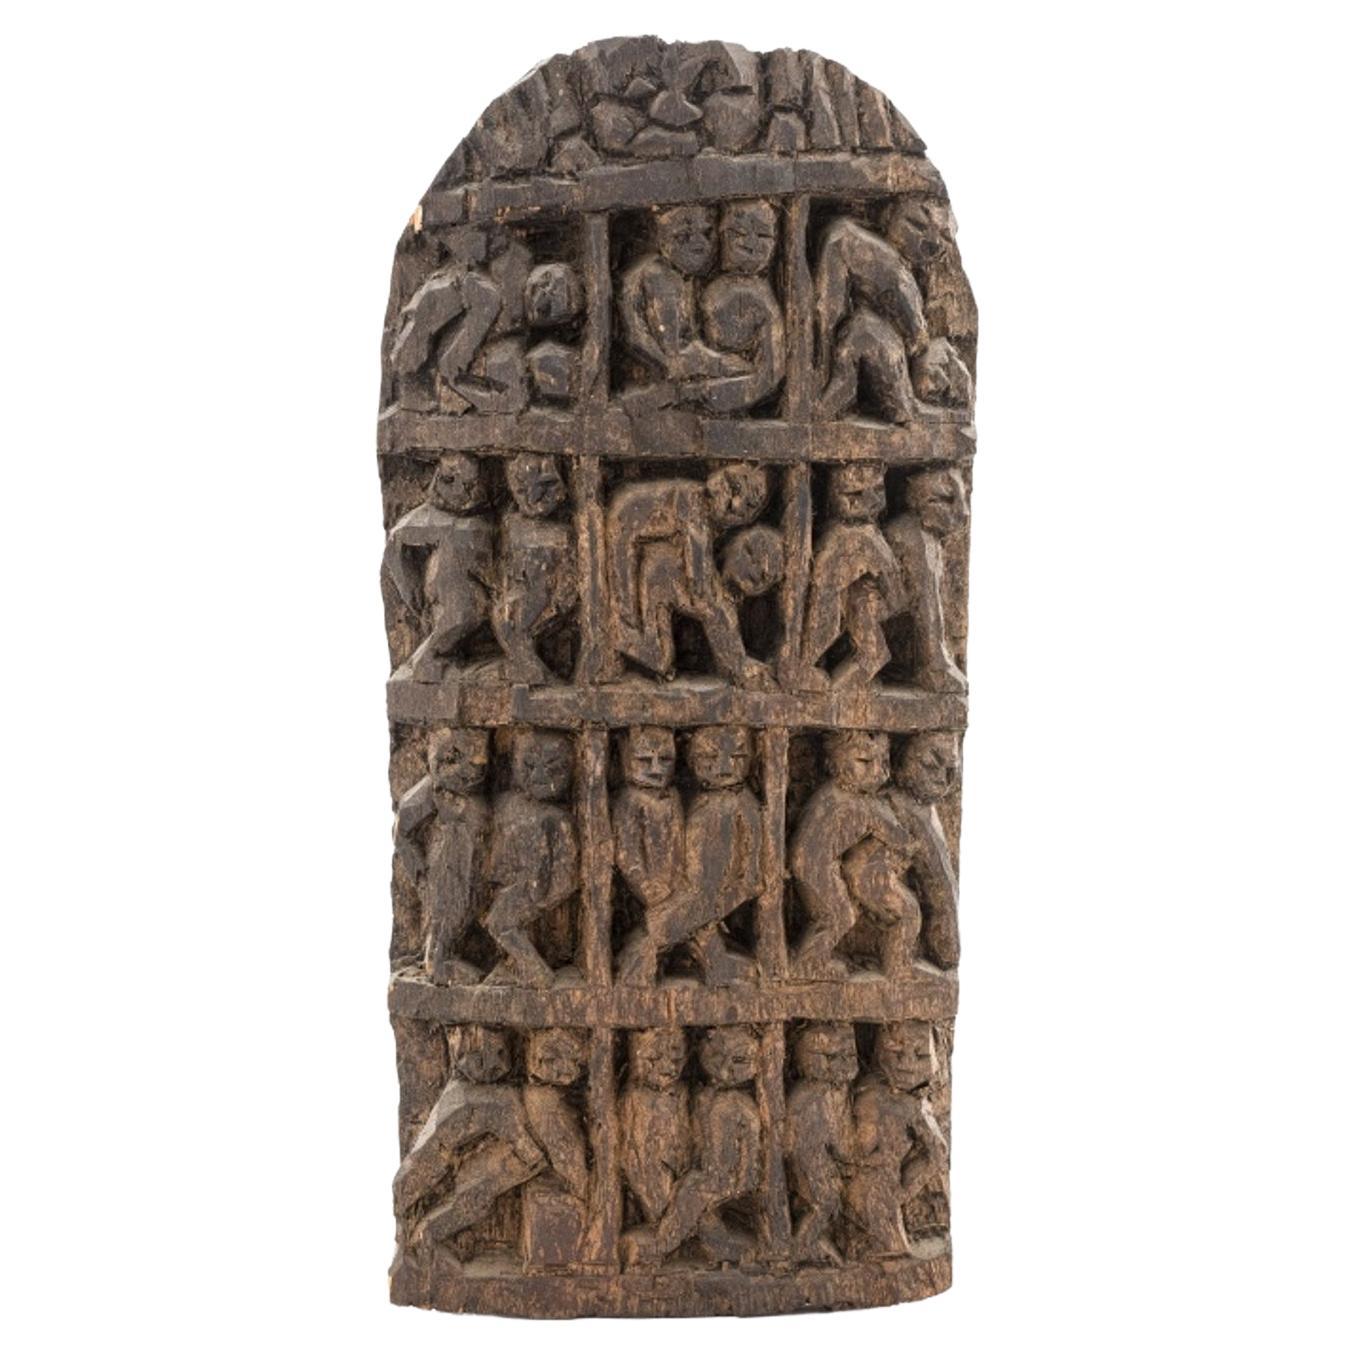 Indian Erotic Wood Carving Plaque For Sale